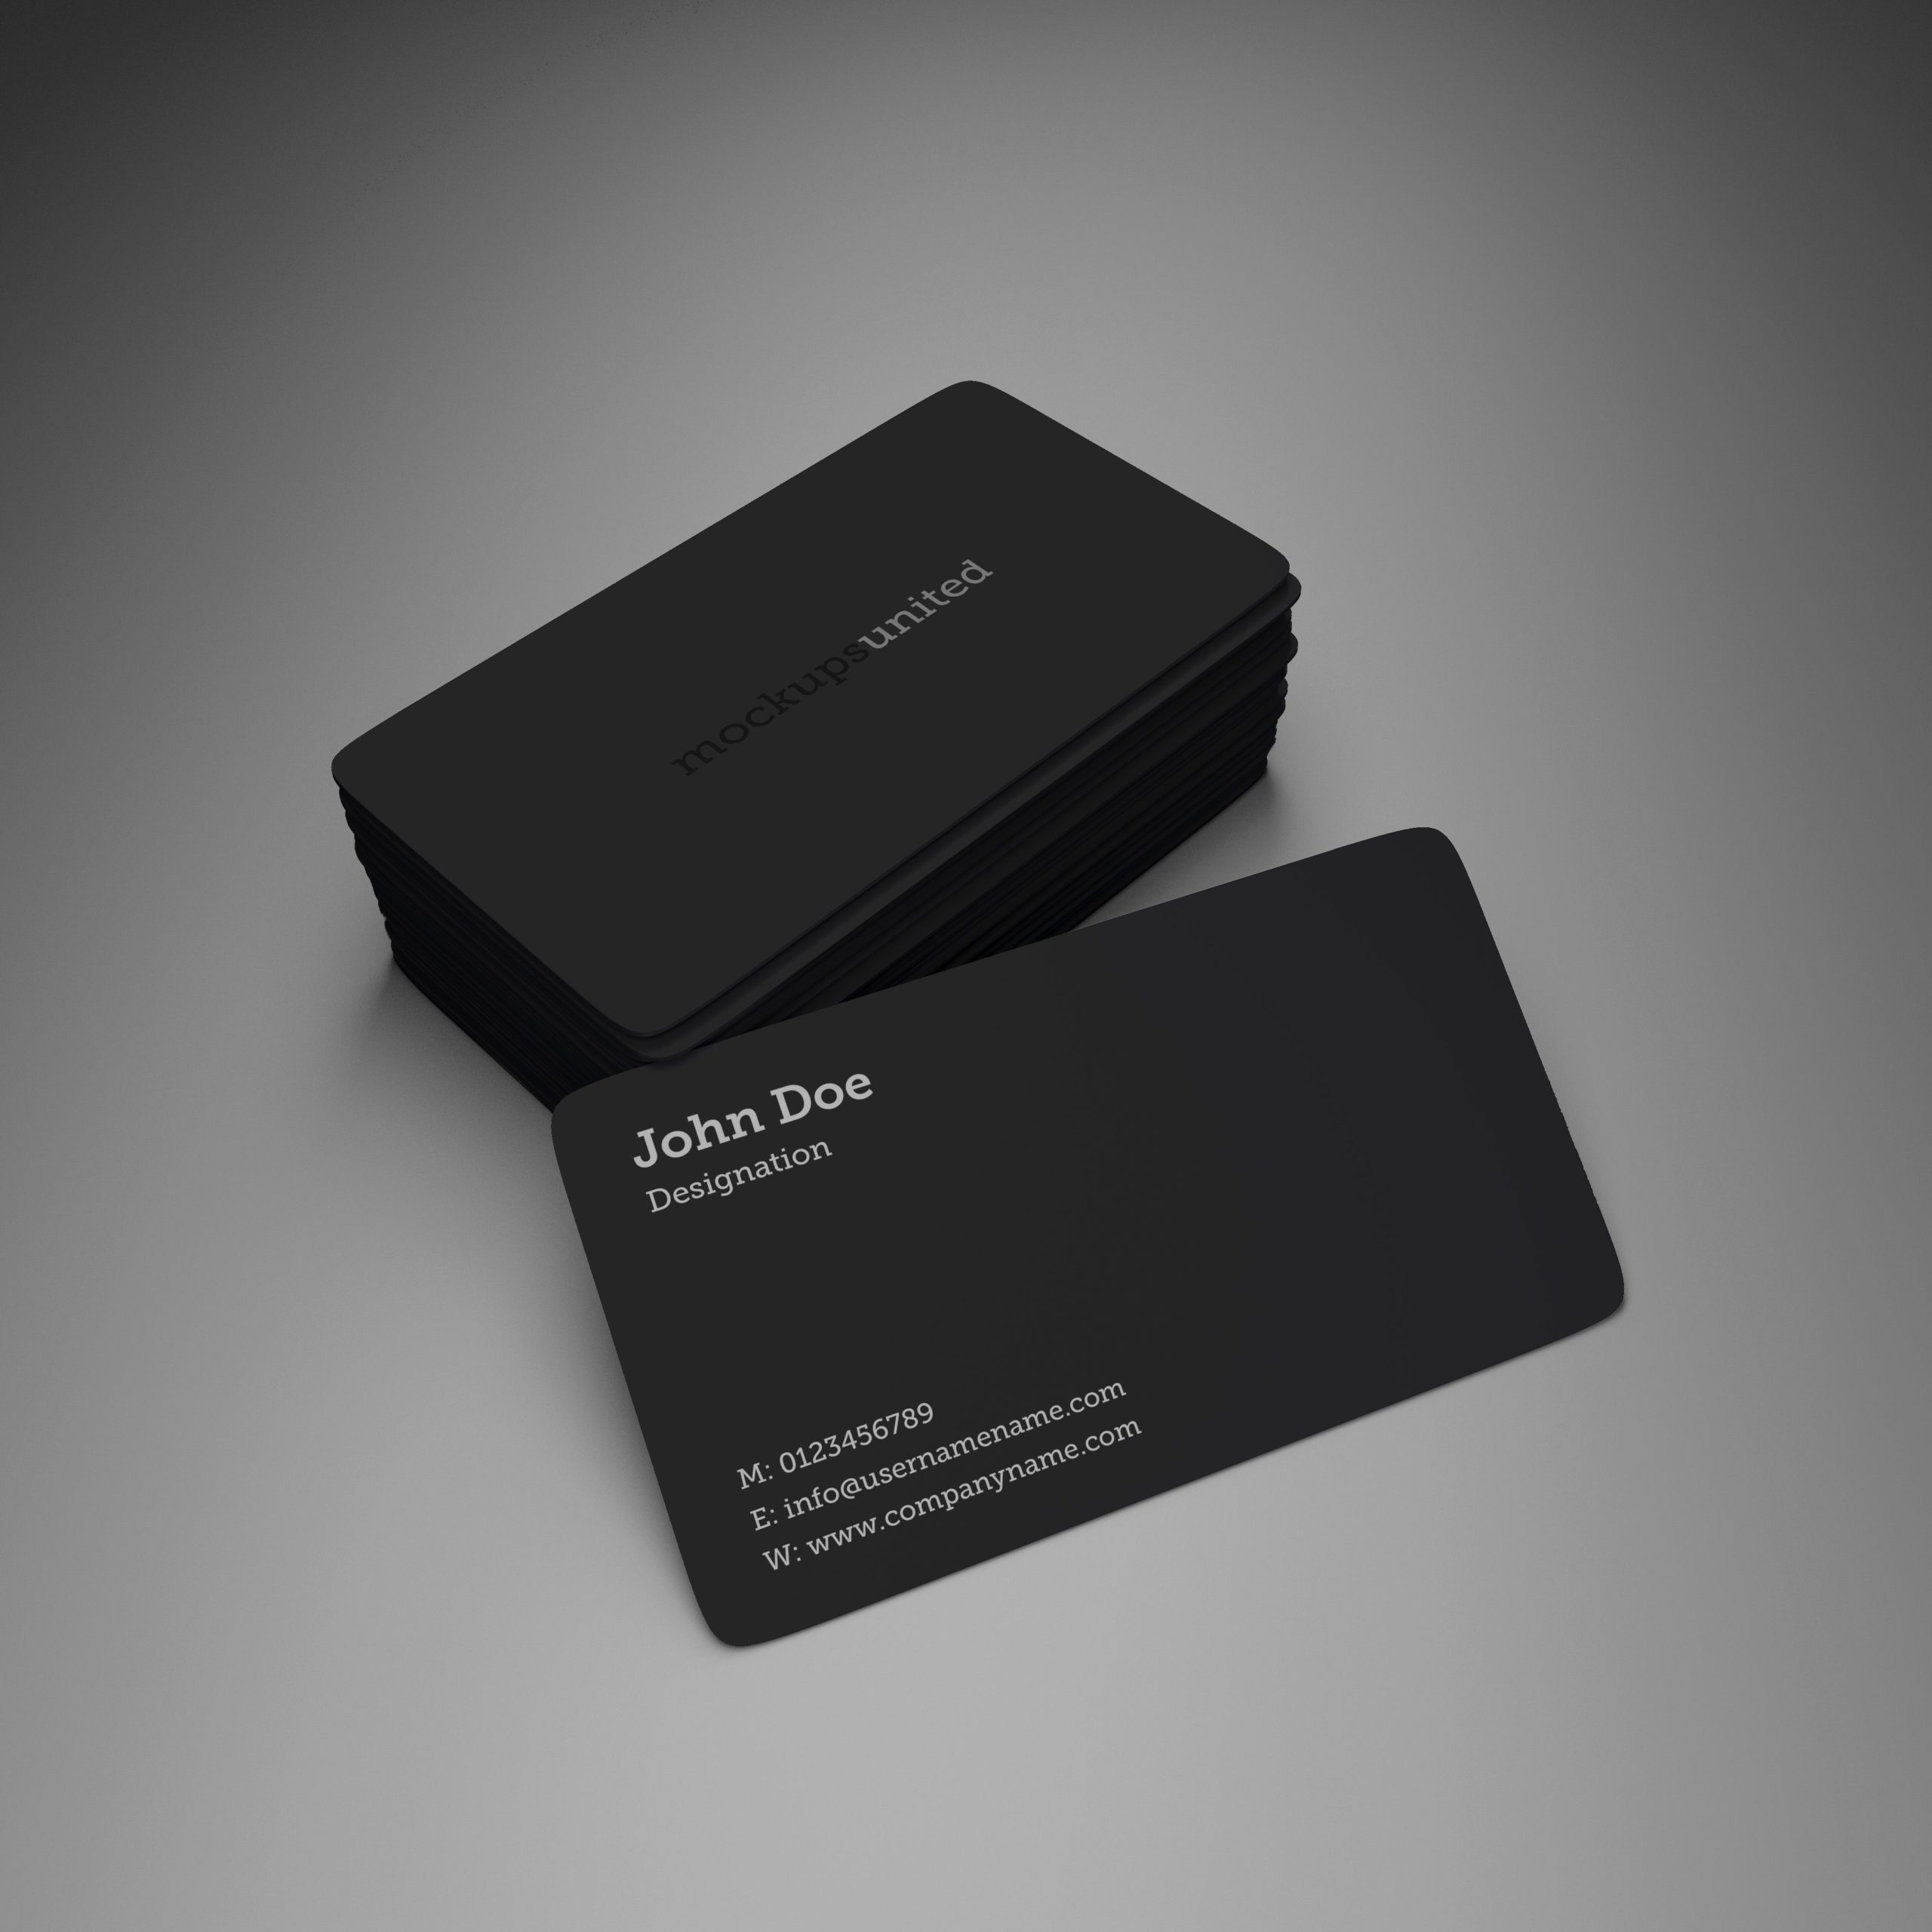 rounded corner business cards 3